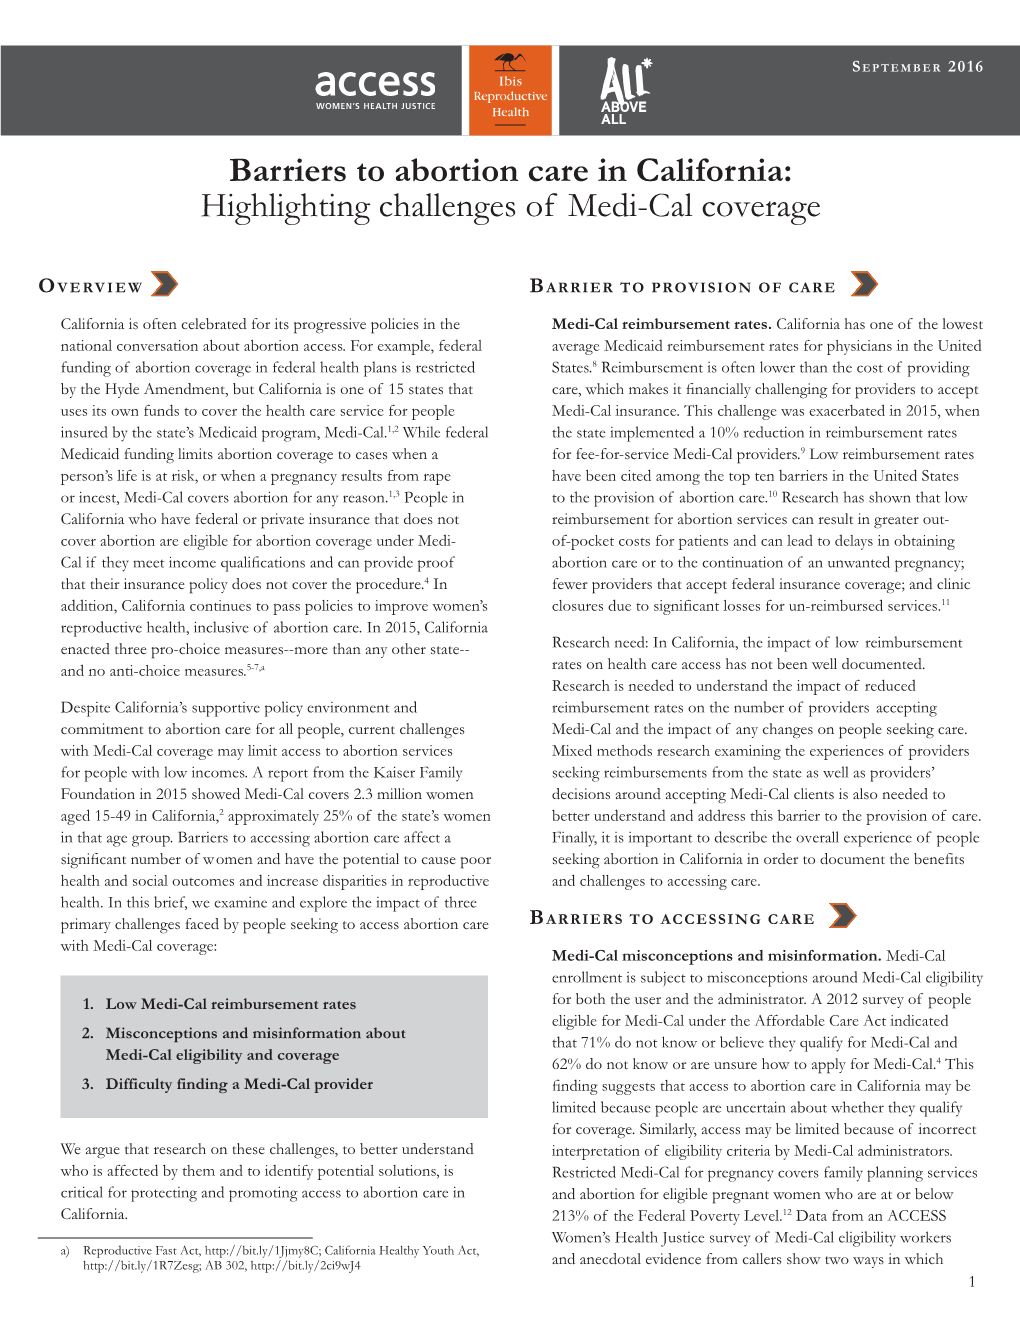 Barriers to Abortion Care in California: Highlighting Challenges of Medi-Cal Coverage